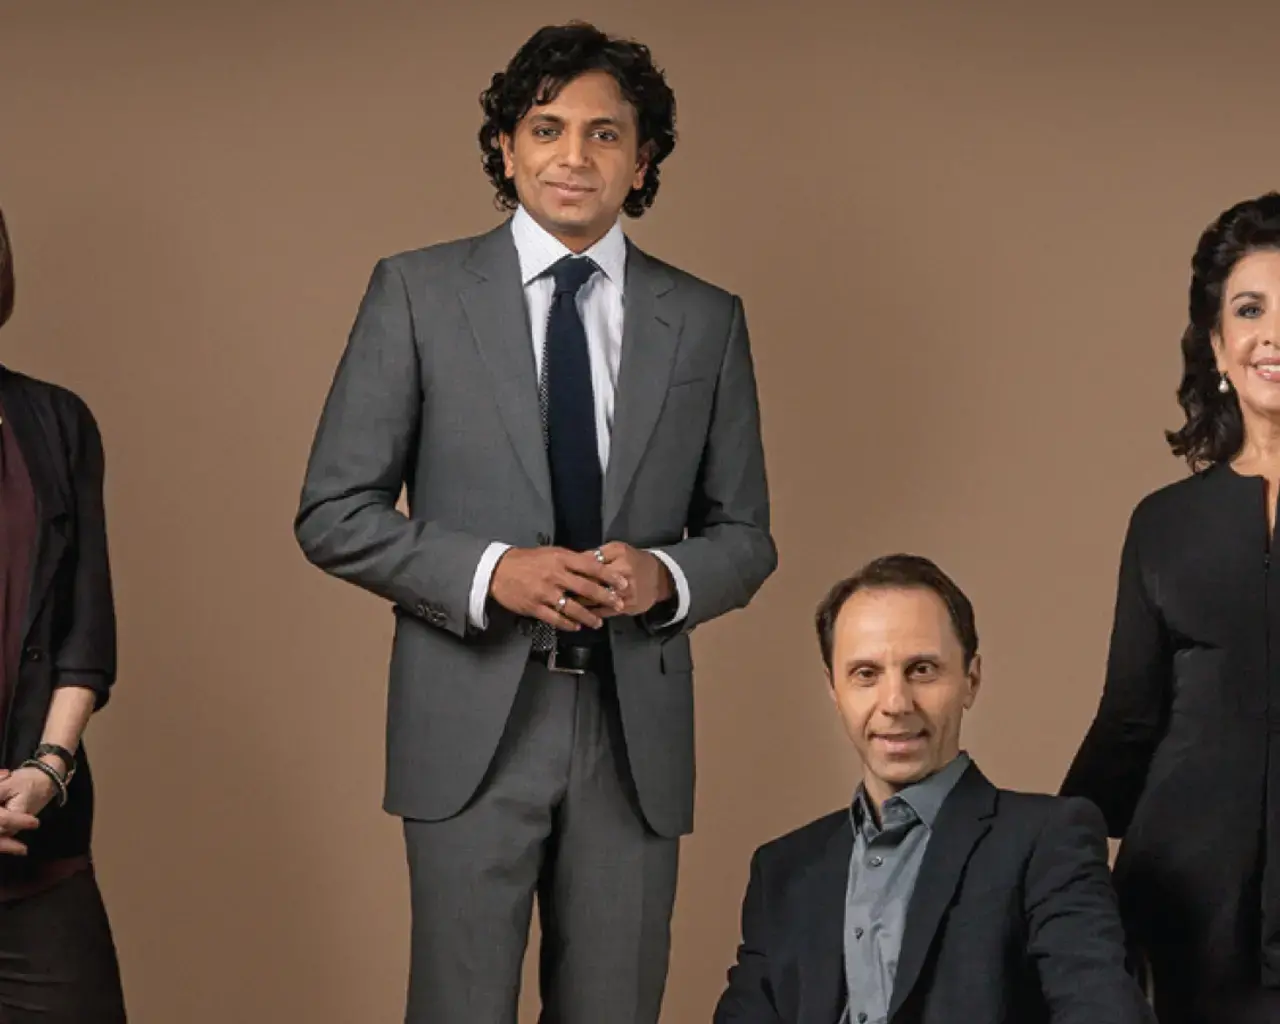 Paula Marincola (far right), executive director of The Pew Center for Arts &amp; Heritage, in the April 2014 issue of Philadelphia Magazine. Also pictured, from left to right: Inga Saffron, M. Night Shyamalan, and Nick Stuccio. Photo courtesy of Philadelphia Magazine.